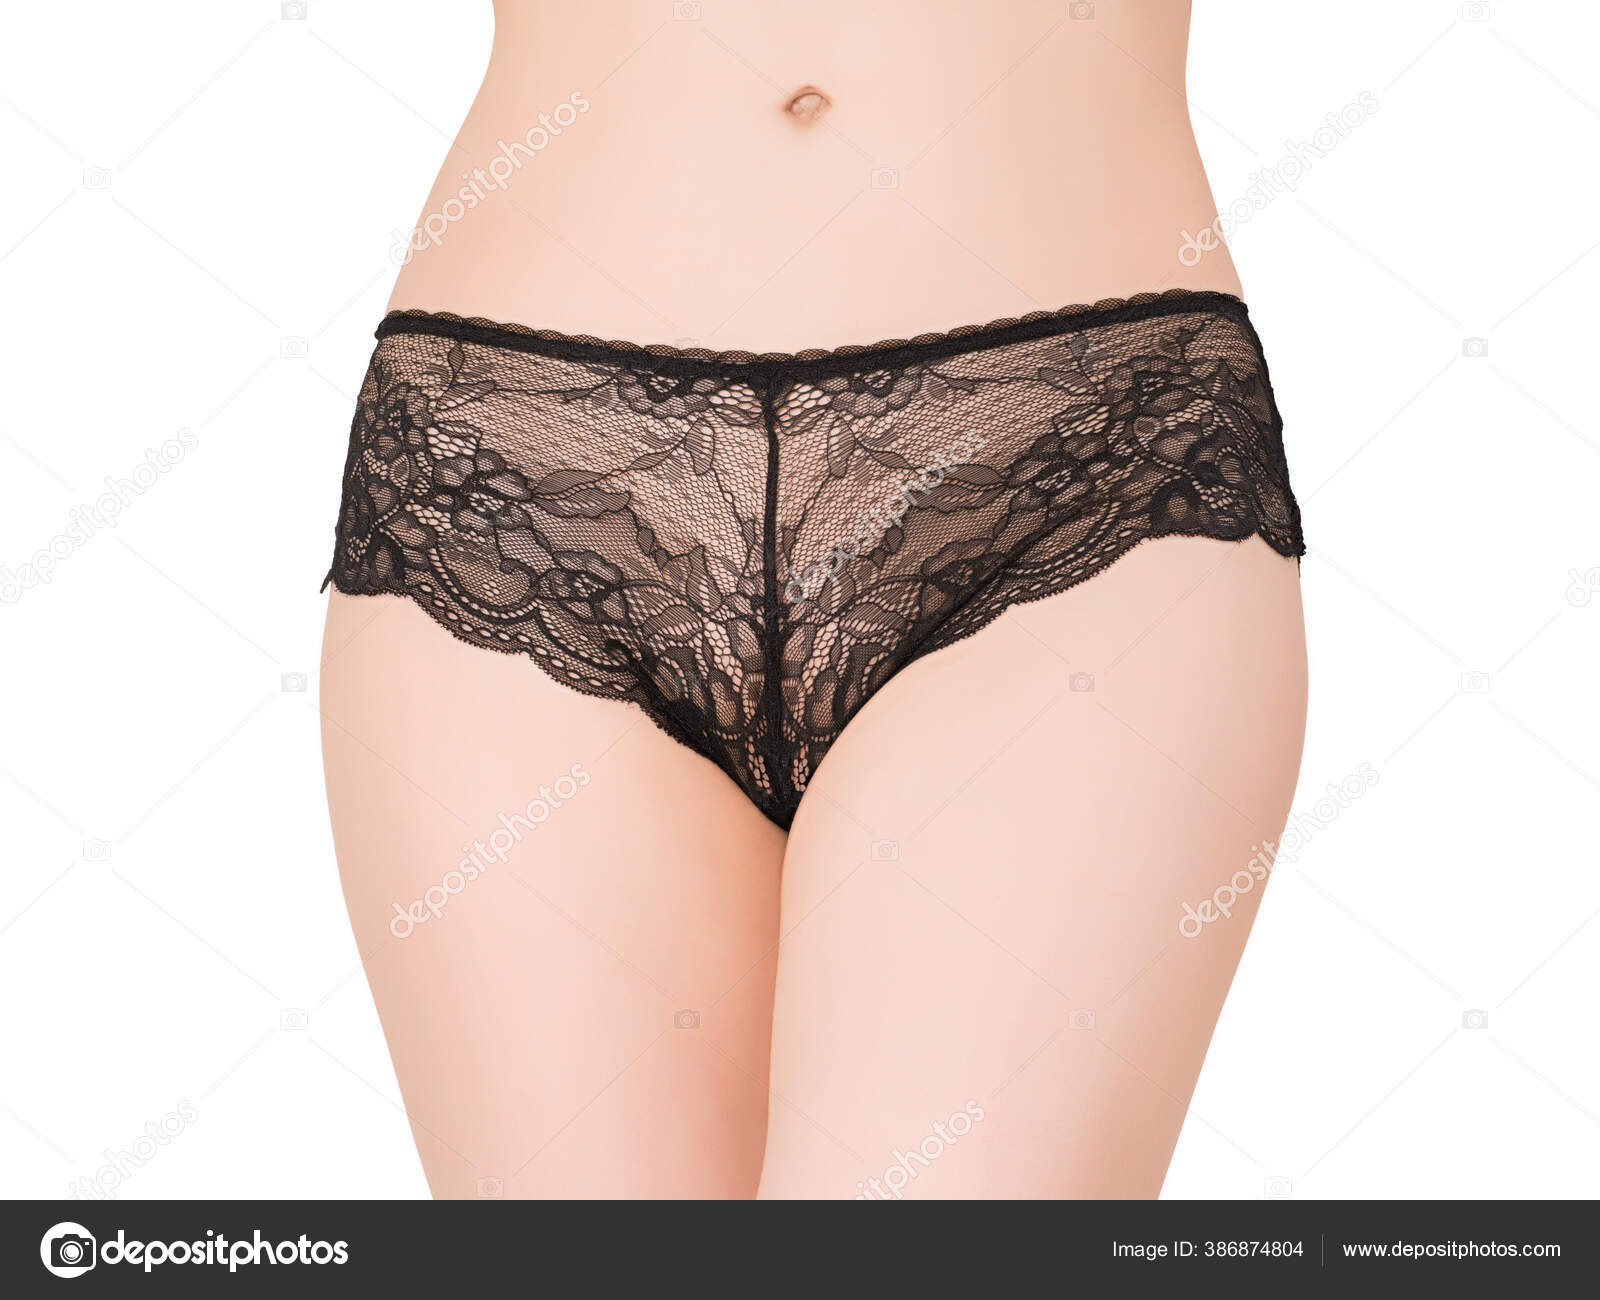 Women's Black Lace Panties Isolated On White Background. Sexy